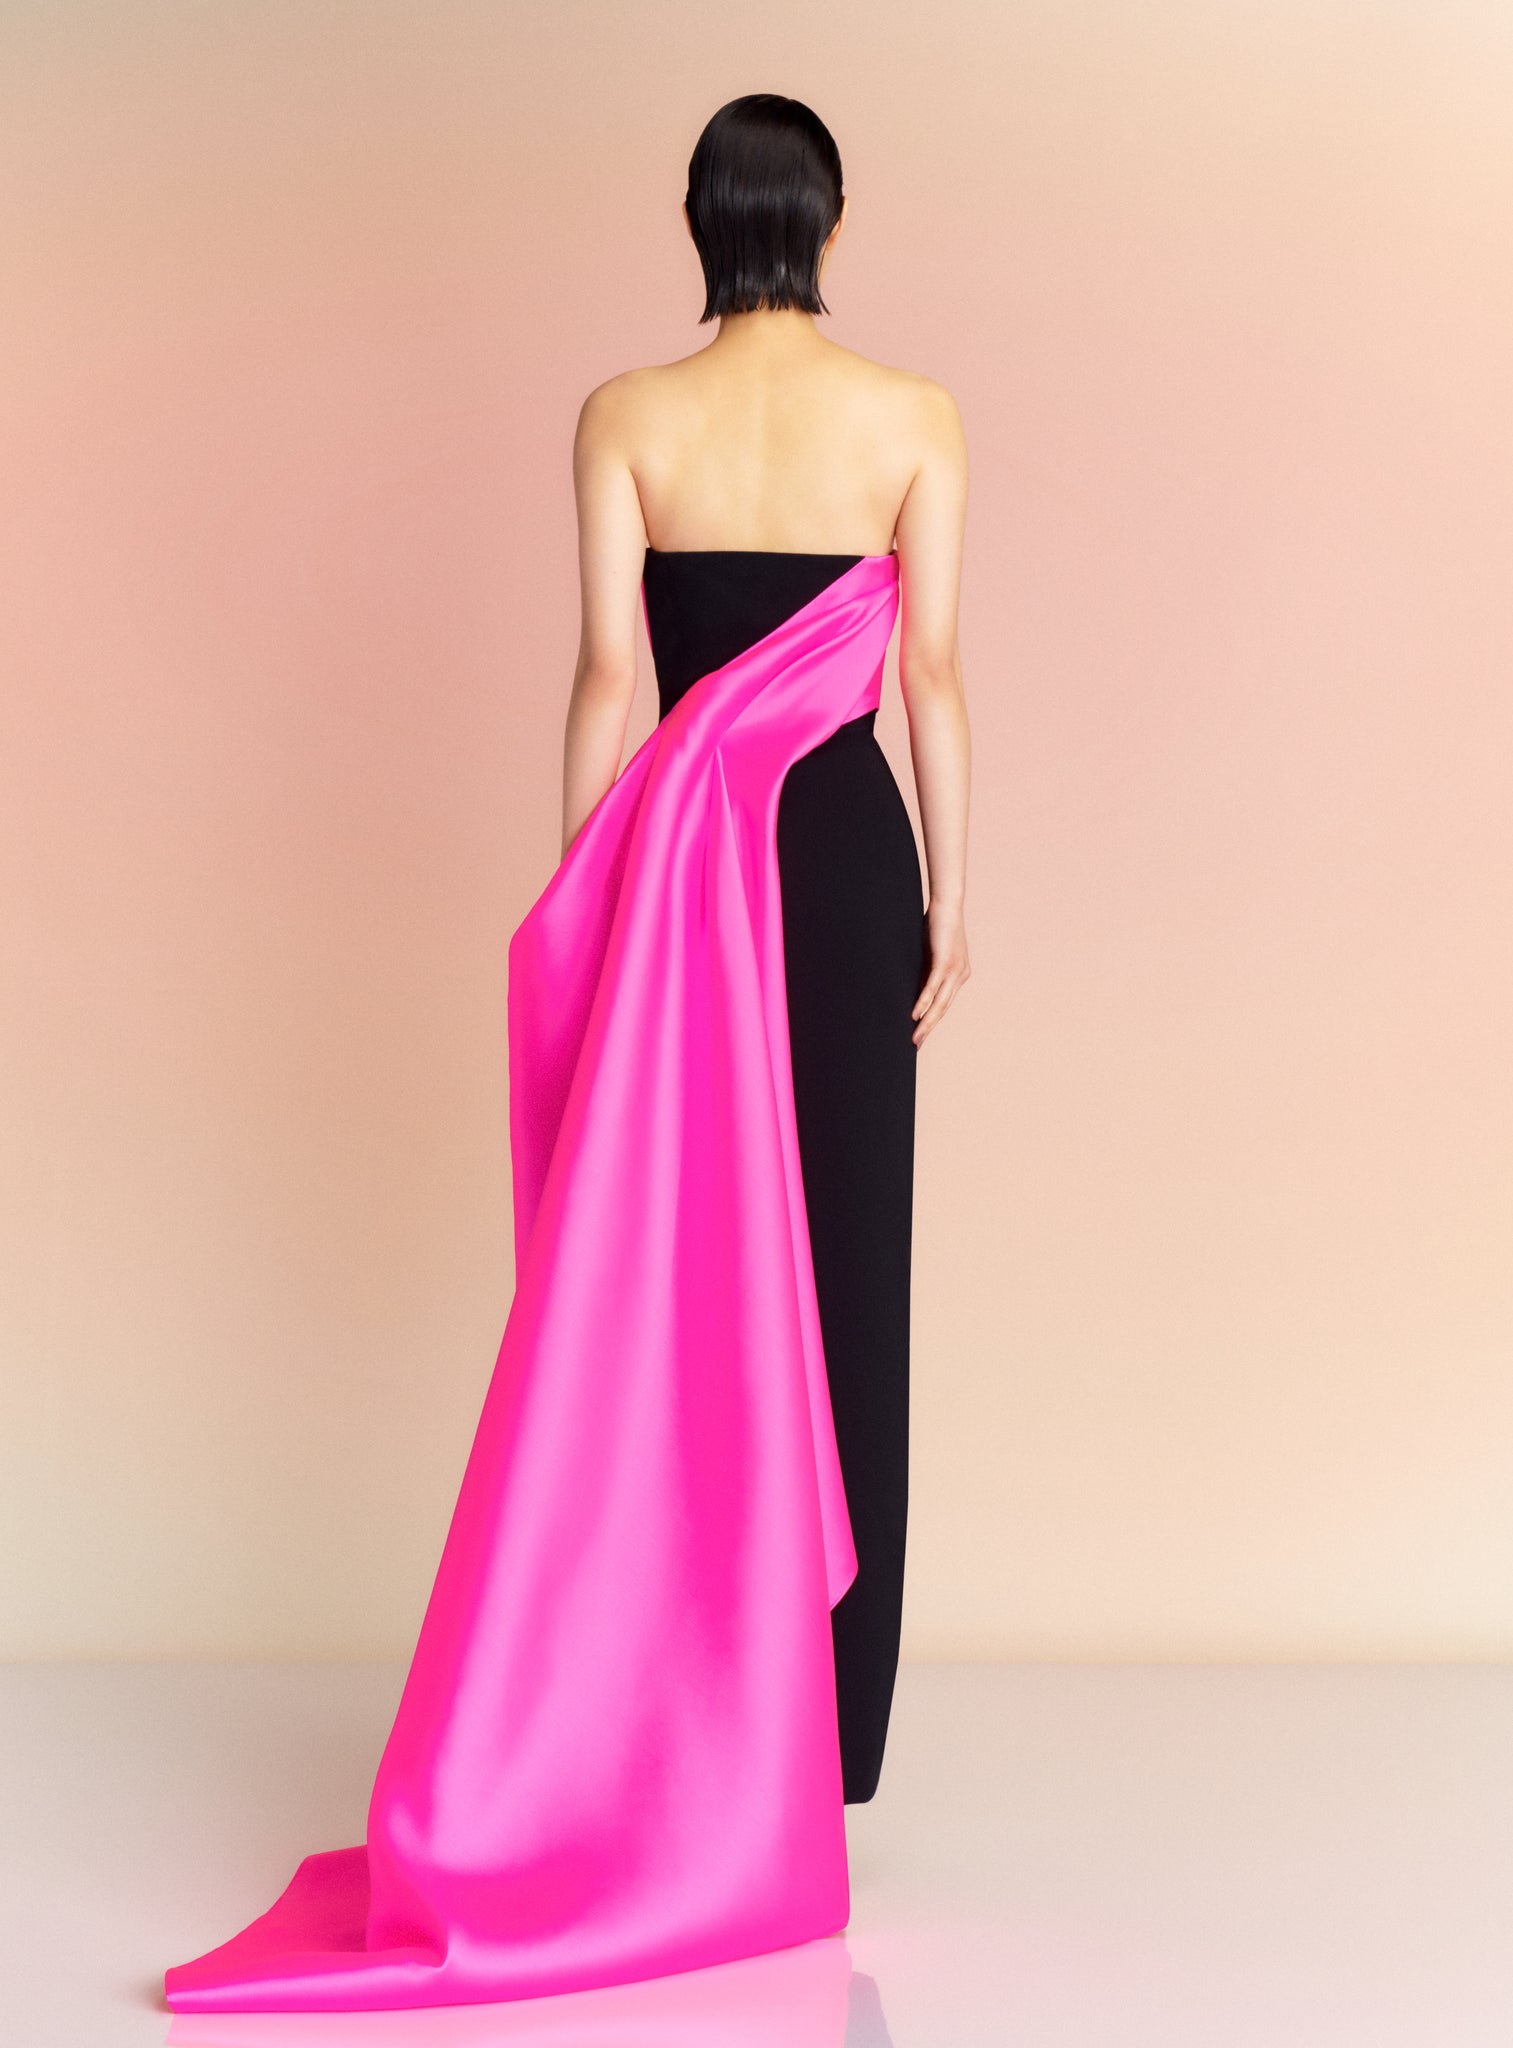 The Kinsley Maxi Dress in Hot Pink & Black